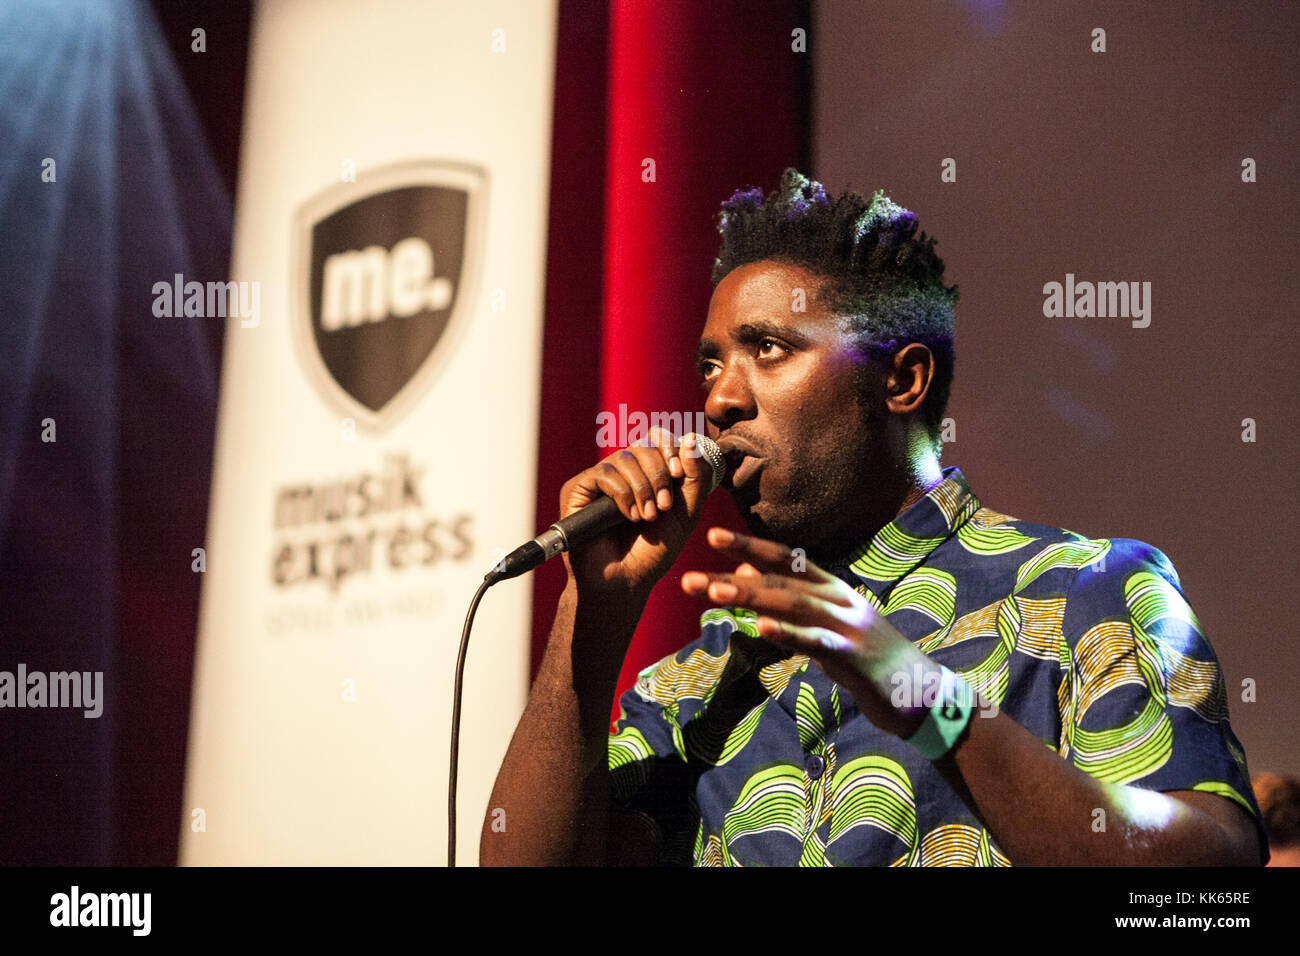 The British musician, singer and songwriter Kelechukwu Rowland Okereke is better known by his stage name Kele and is here pictured live on stage at E-Werk in Berlin. Kele Okereke is also known as the guitarist and singer of the indie rock band Bloc Party. Germany, 15/10 2014. Stock Photo